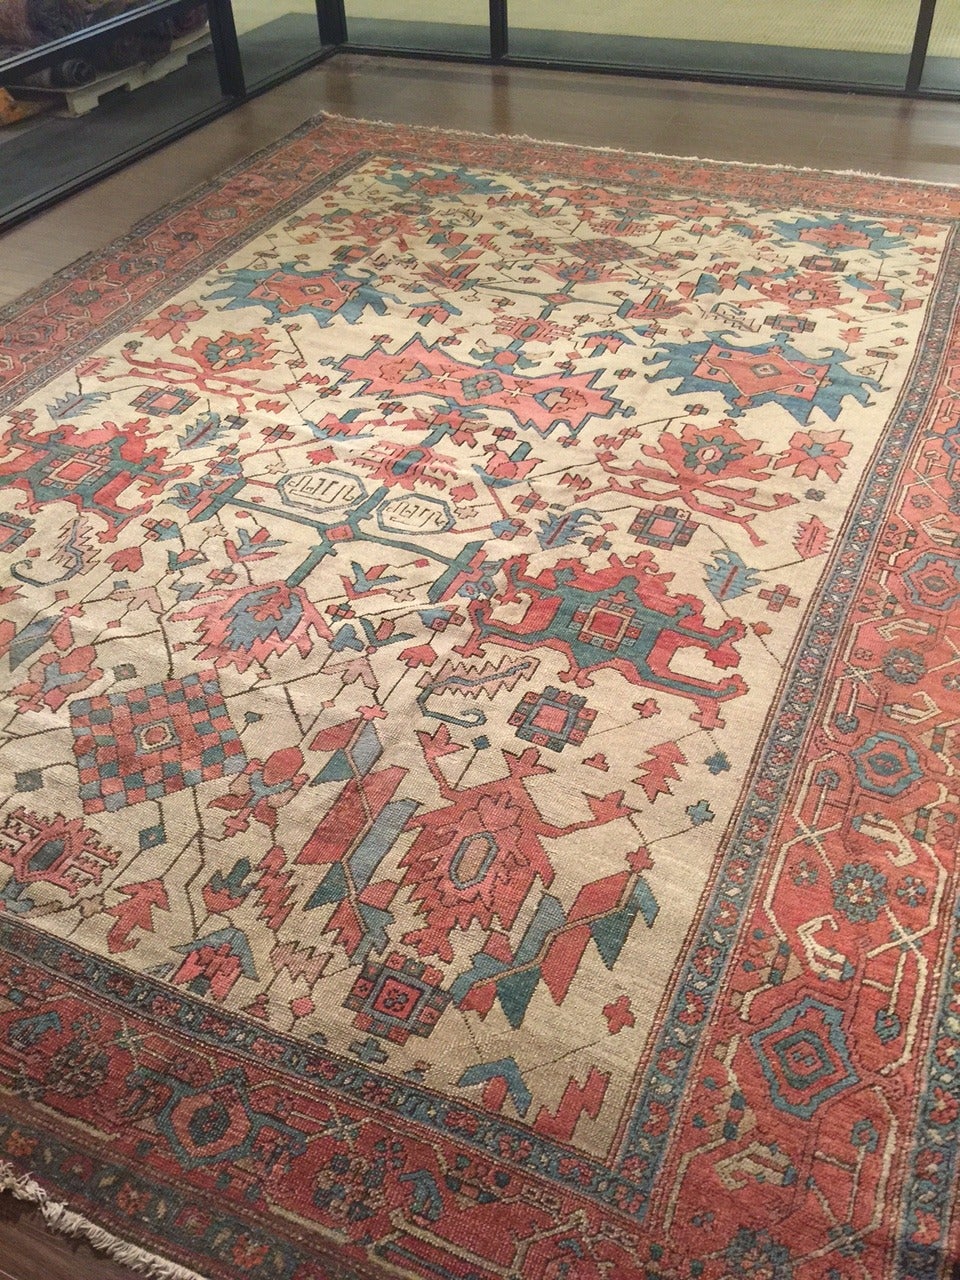 Antique Persian ivory Serapi rug, circa 1900. Serapi carpets are a quality designation for Heriz pieces of a firmer weave, shorter pile and finer quality. There is no village of Serapi among the thirty-odd towns in the Heriz weaving district.